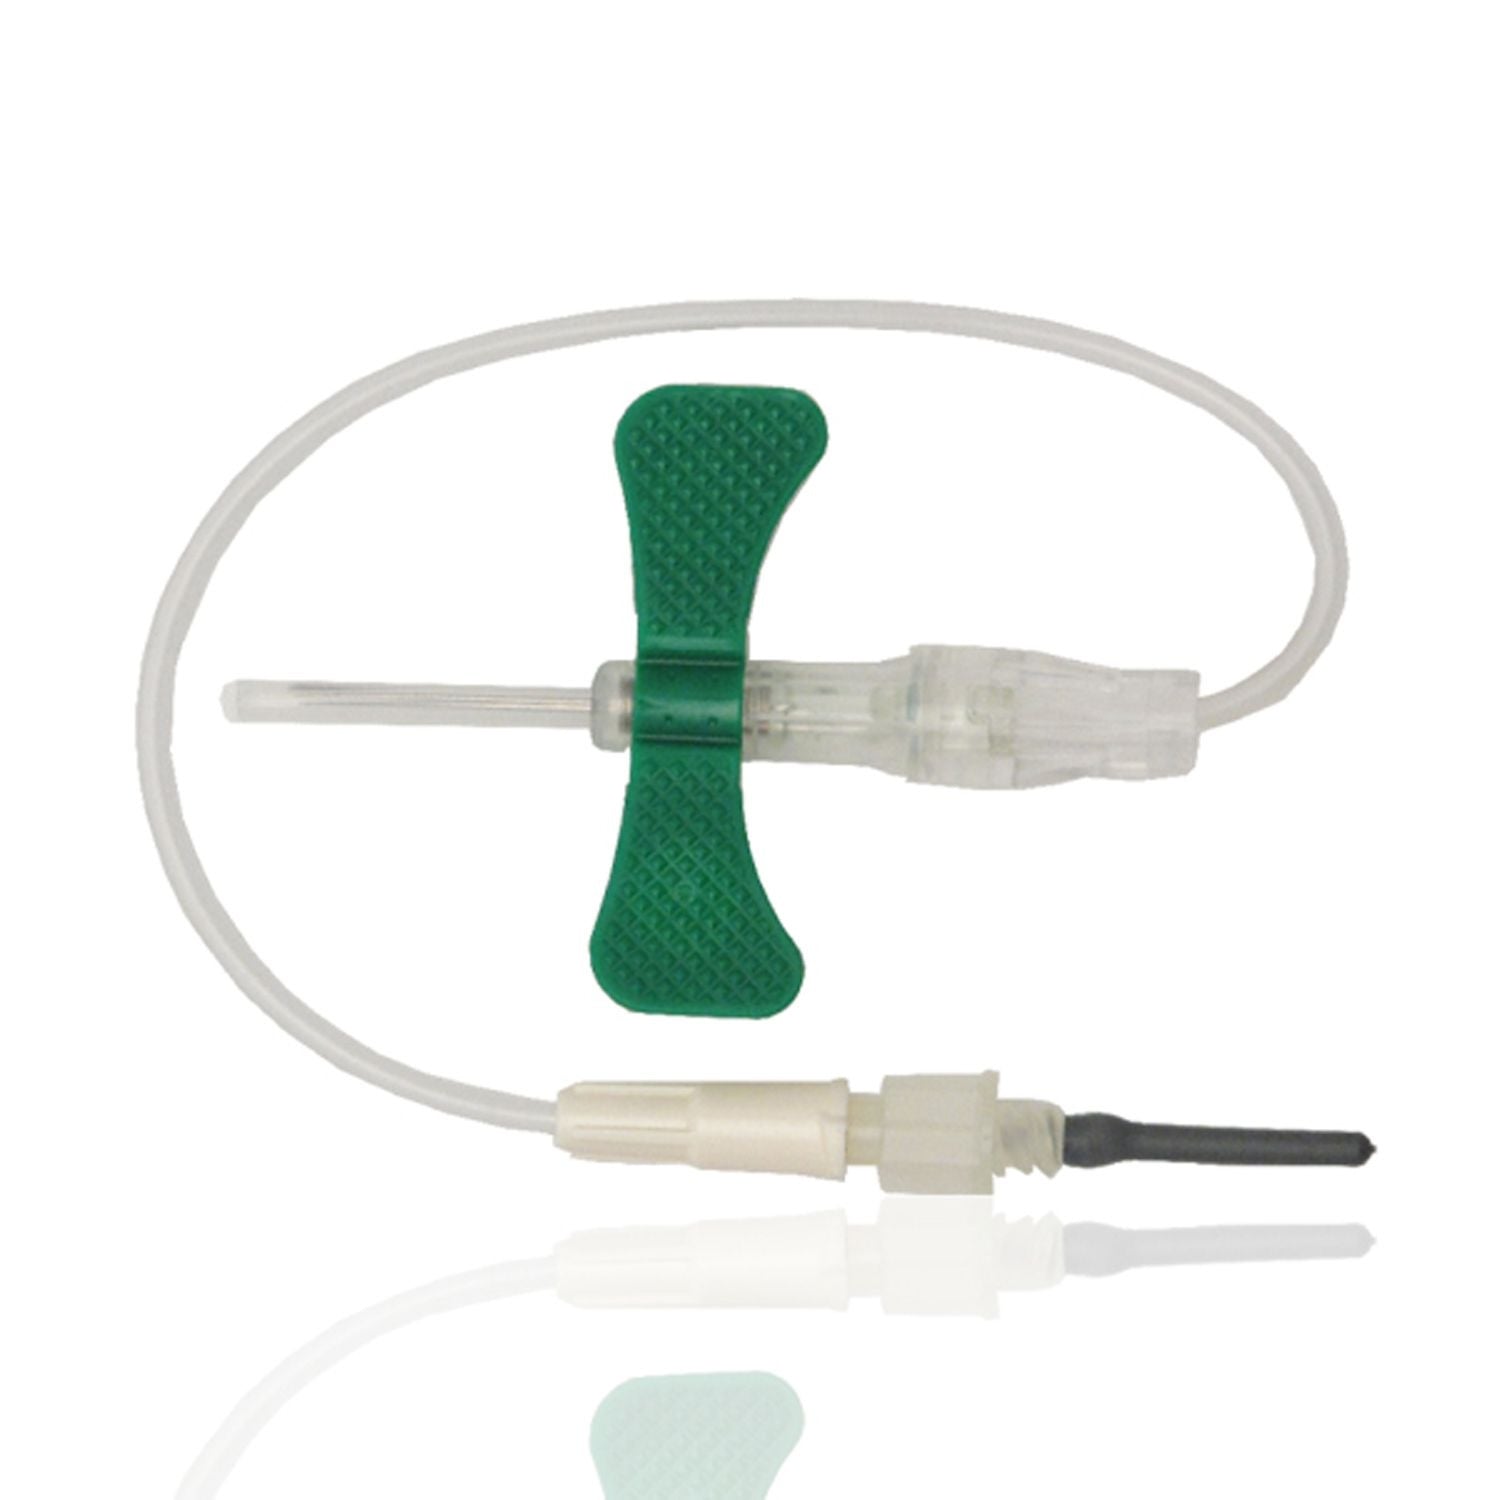 BD Vacutainer Push Button Blood Collection System | Luer Adapter | 25G x 7" Tubing | 0.75" Needle | Pack of 200